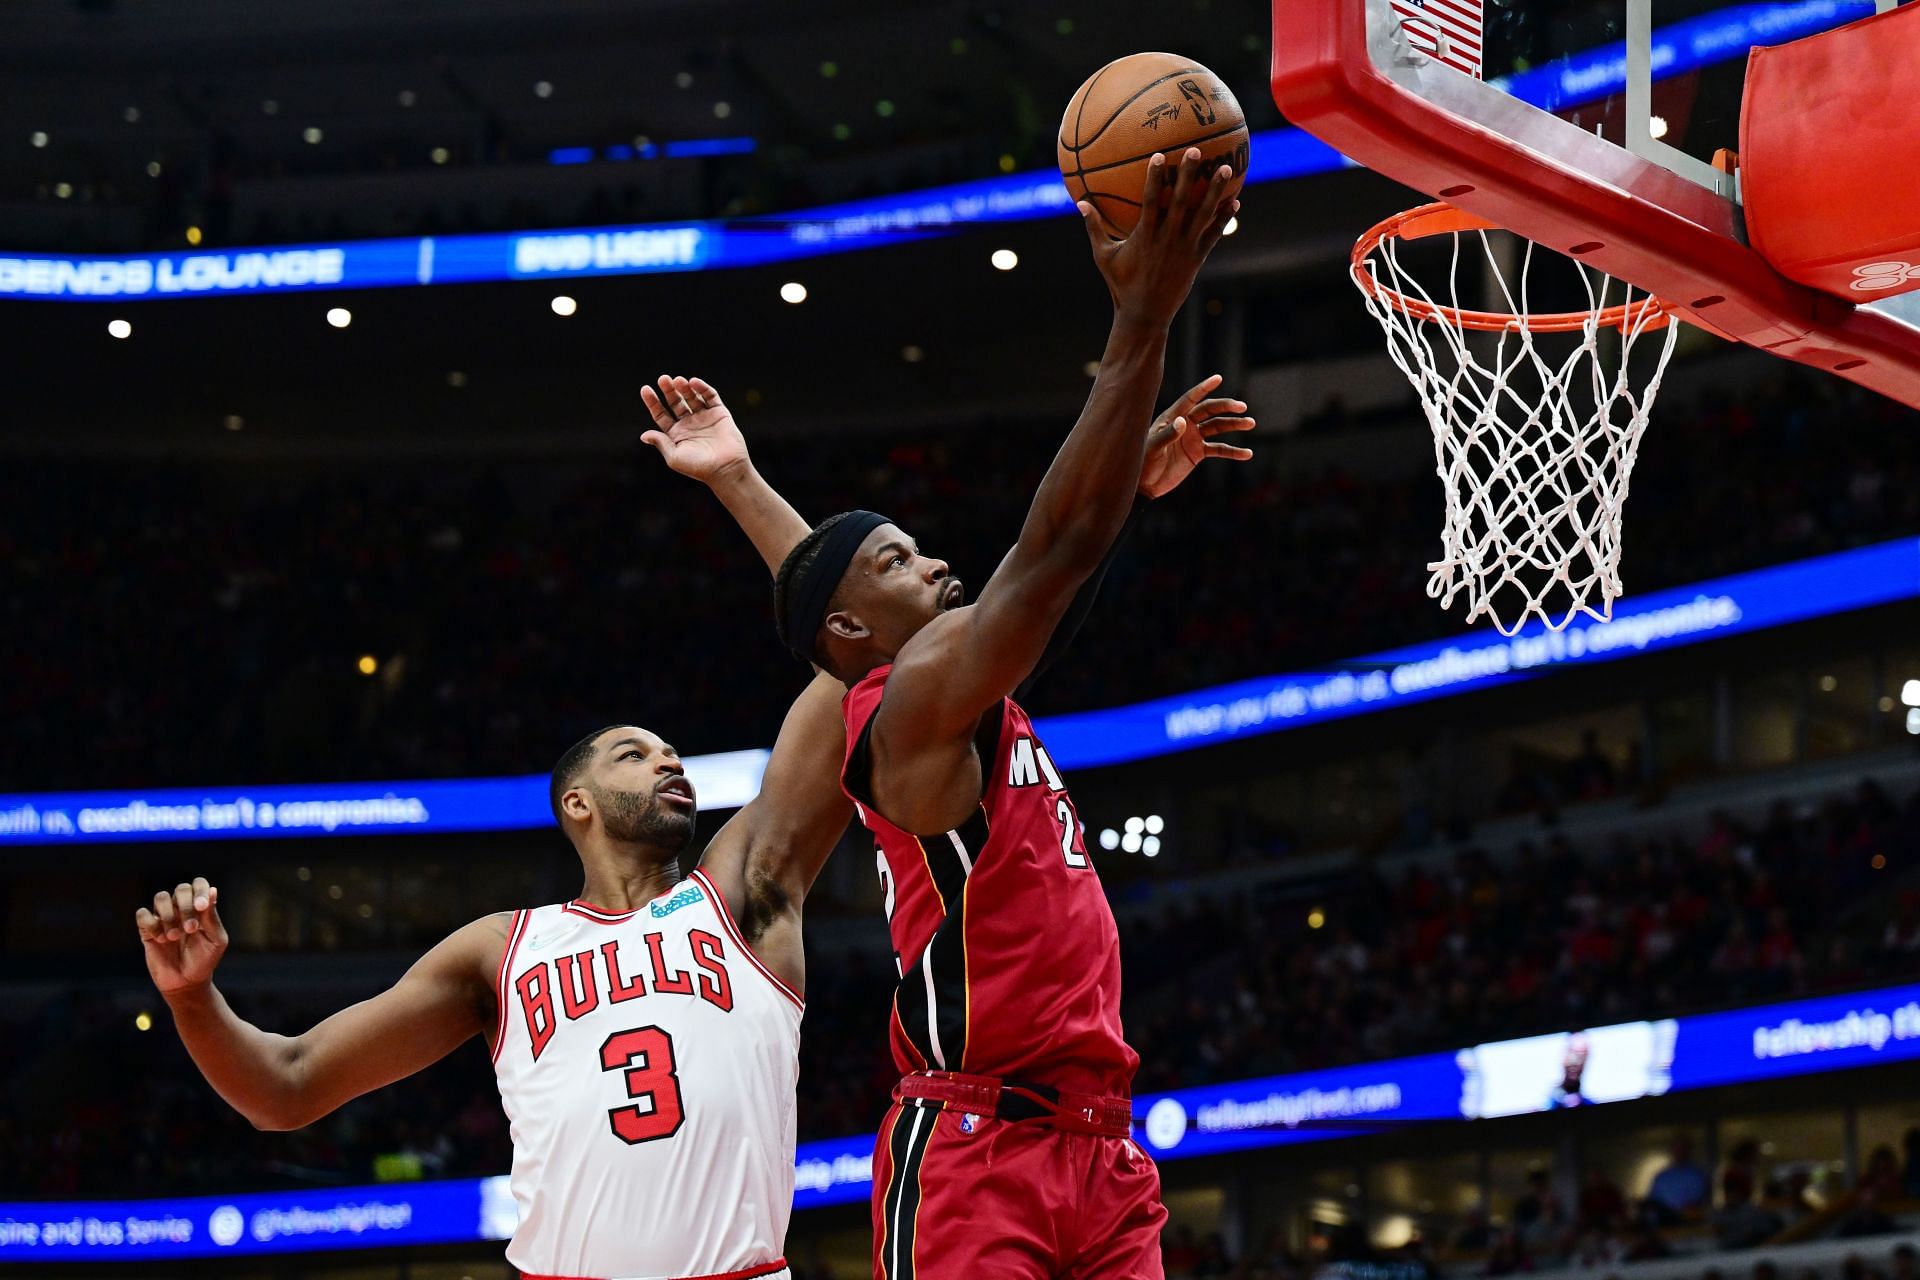 Tristan Thompson (left) in action during for the Miami Heat against the Chicago Bulls